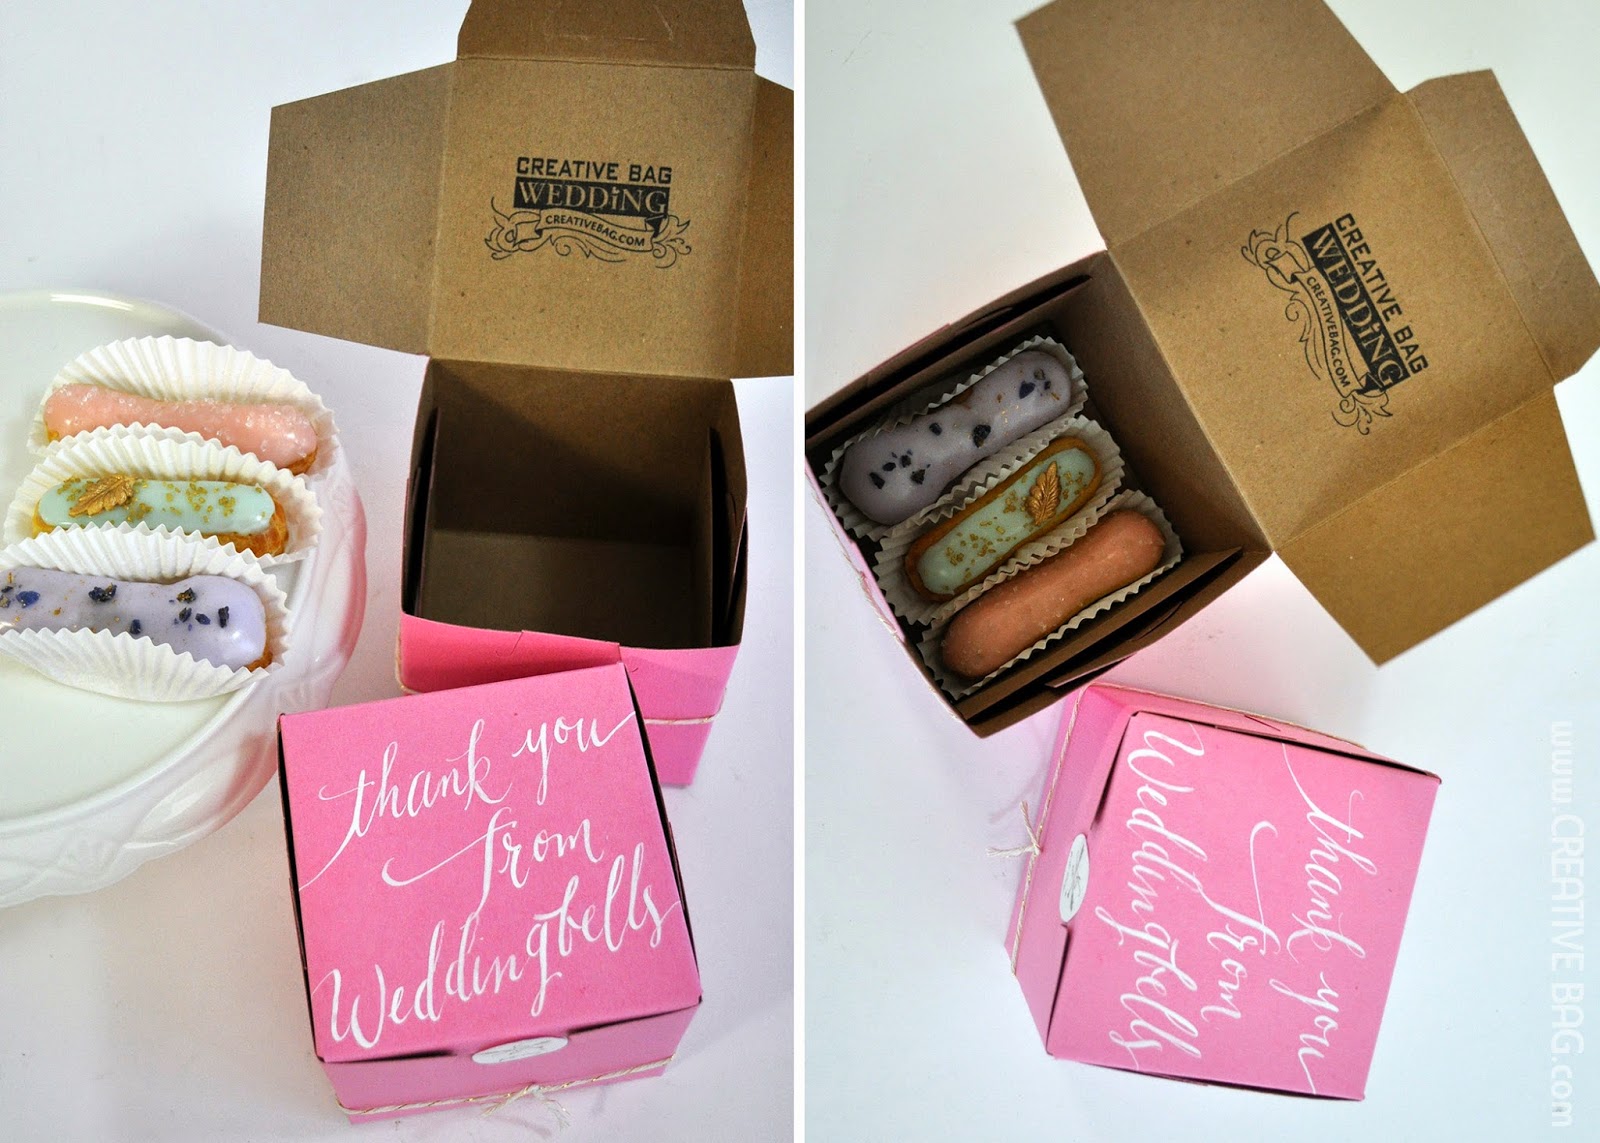 eclair favors - bakery boxes with beautiful calligraphy | creativebag.com